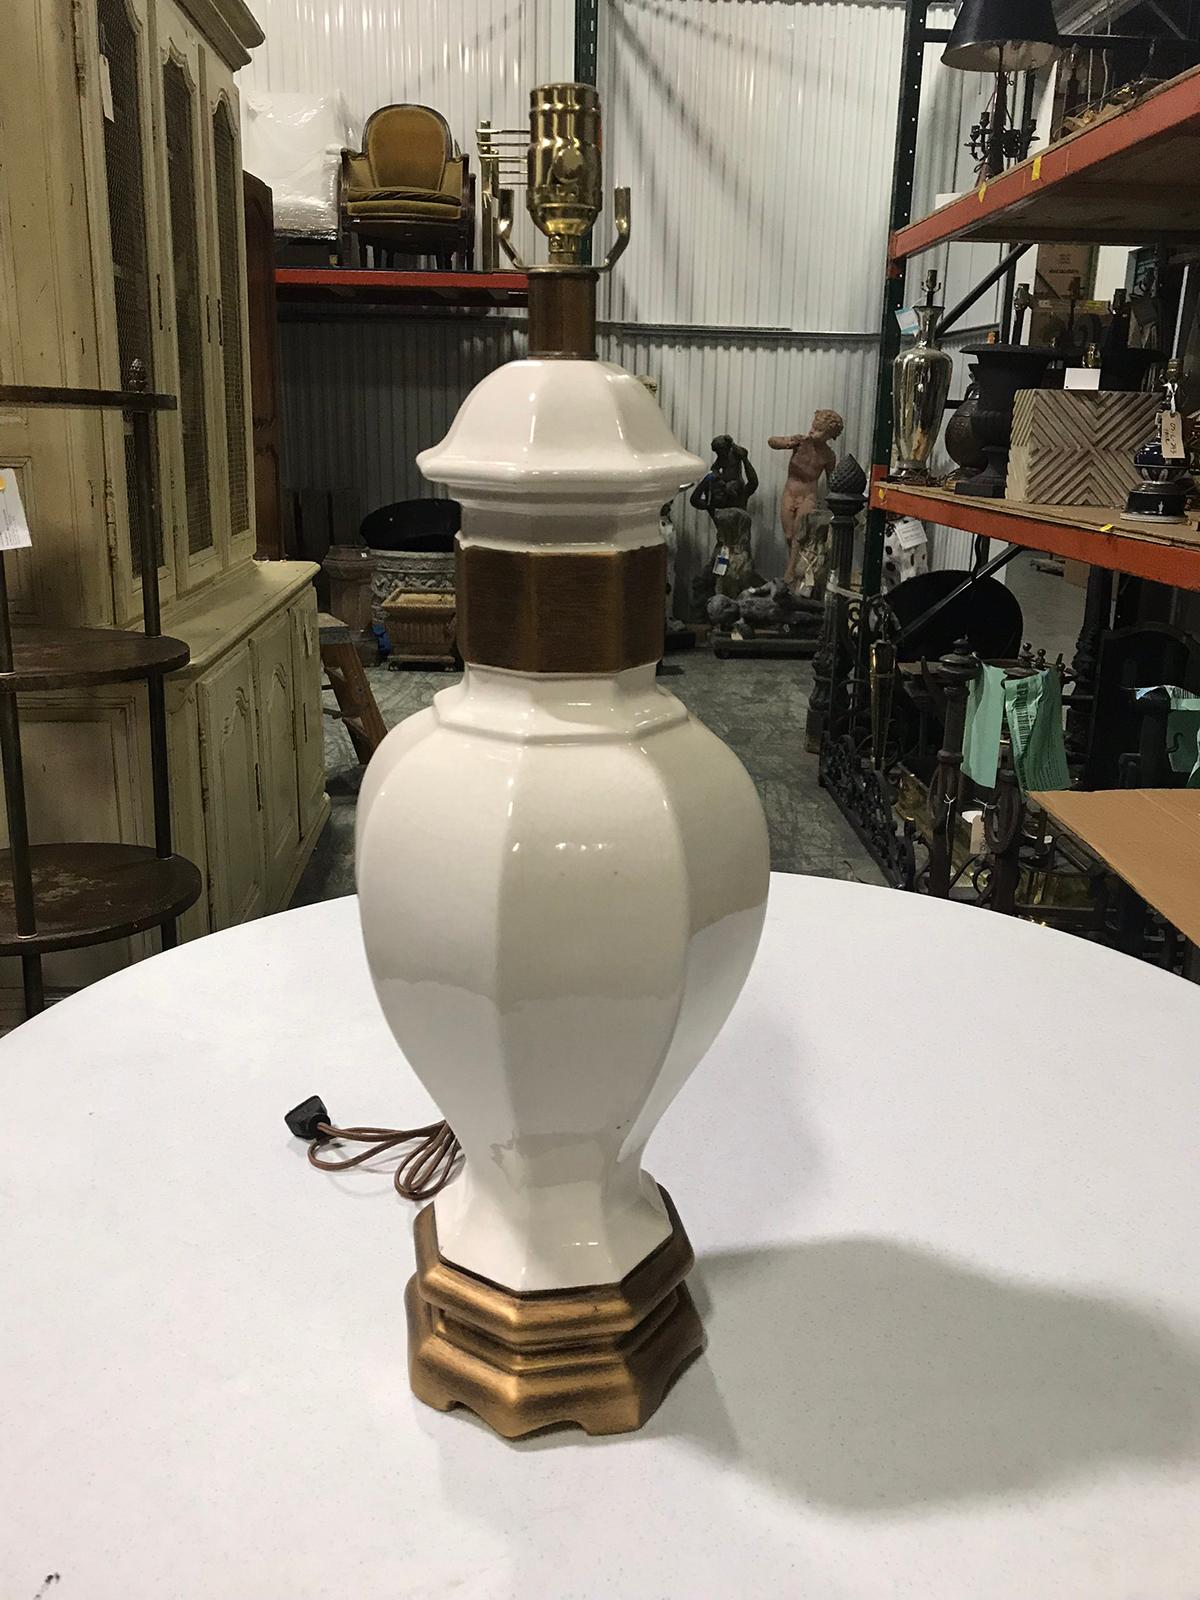 Mid-20th century white ceramic lamp with custom gilded base
New wiring.